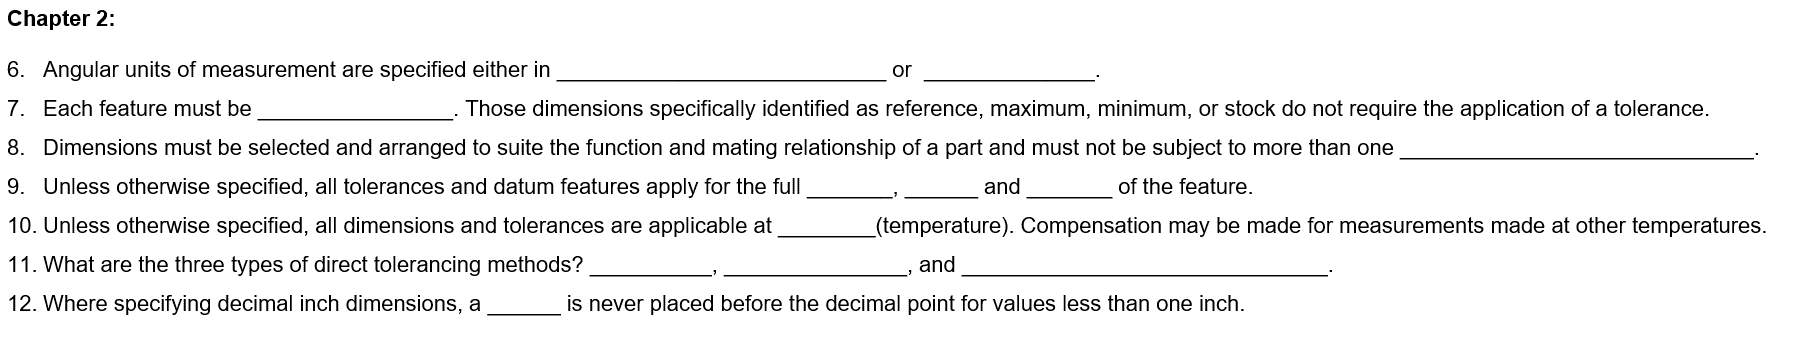 Chapter 2:
6. Angular units of measurement are specified either in
7. Each feature must be
or
. Those dimensions specifically identified as reference, maximum, minimum, or stock do not require the application of a tolerance.
and
of the feature.
8. Dimensions must be selected and arranged to suite the function and mating relationship of a part and must not be subject to more than one
9. Unless otherwise specified, all tolerances and datum features apply for the full
10. Unless otherwise specified, all dimensions and tolerances are applicable at
11. What are the three types of direct tolerancing methods?
12. Where specifying decimal inch dimensions, a
(temperature). Compensation may be made for measurements made at other temperatures.
and
is never placed before the decimal point for values less than one inch.